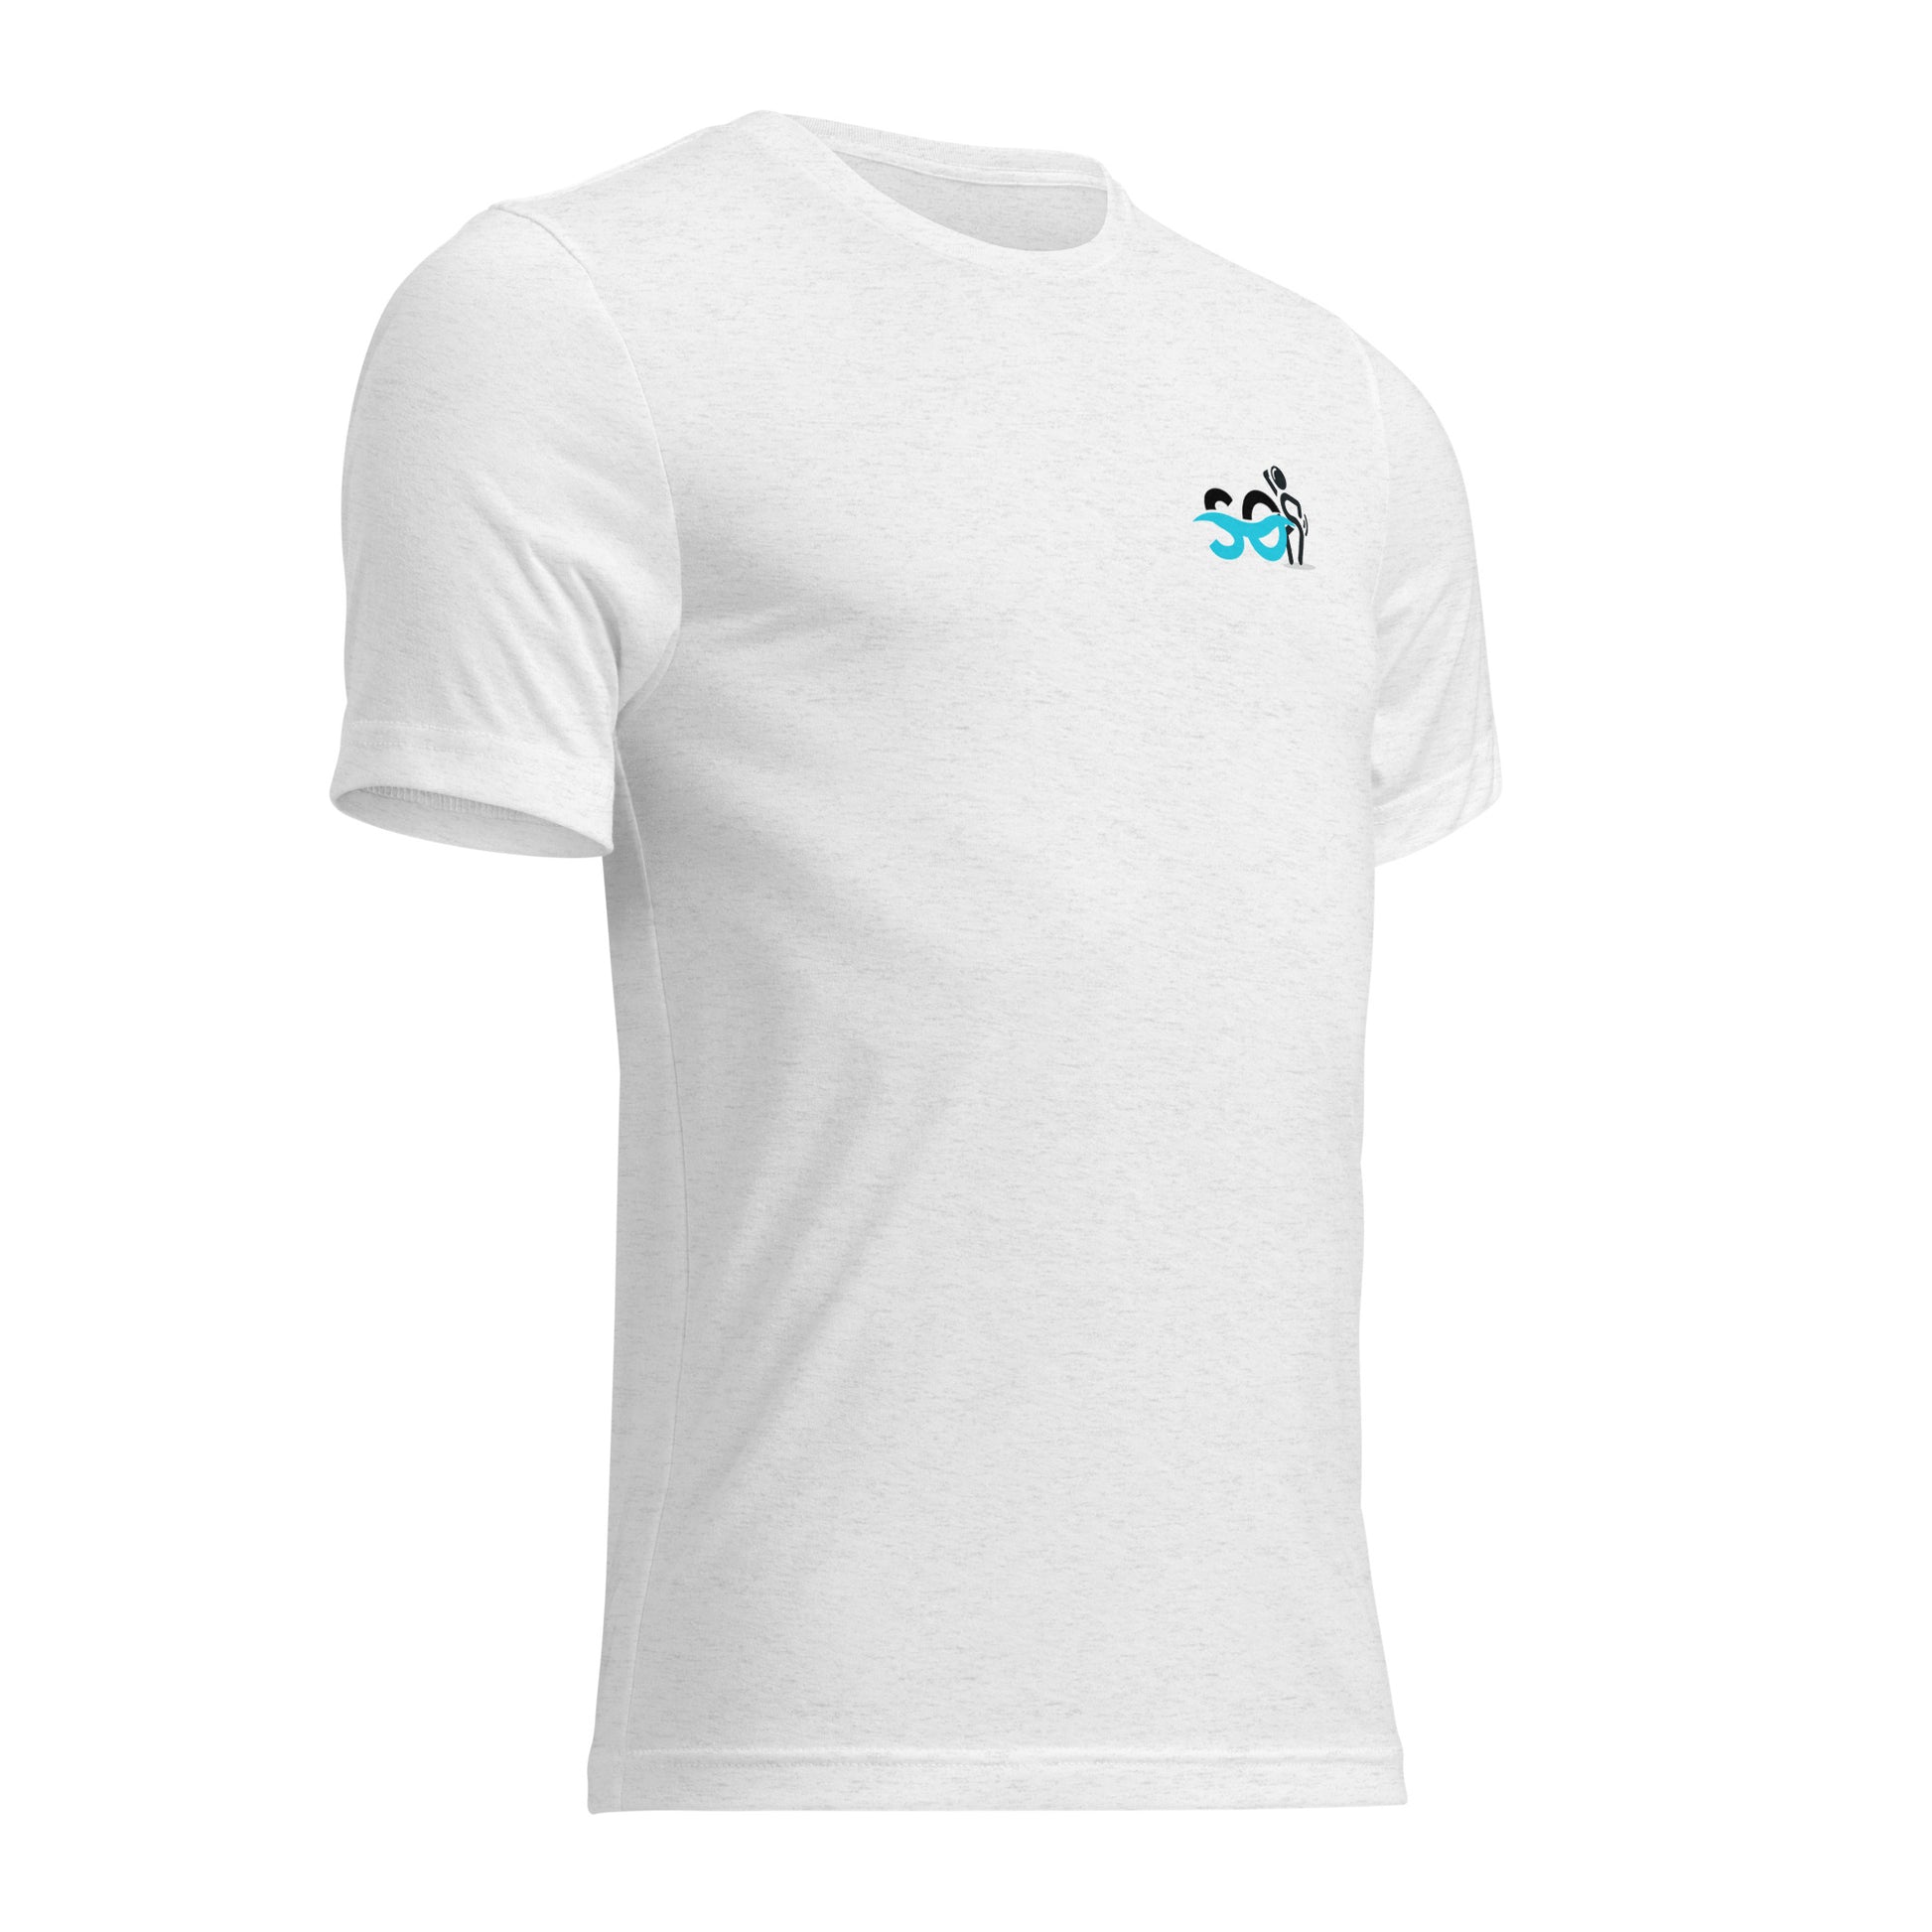 a white t - shirt with a blue logo on the chest